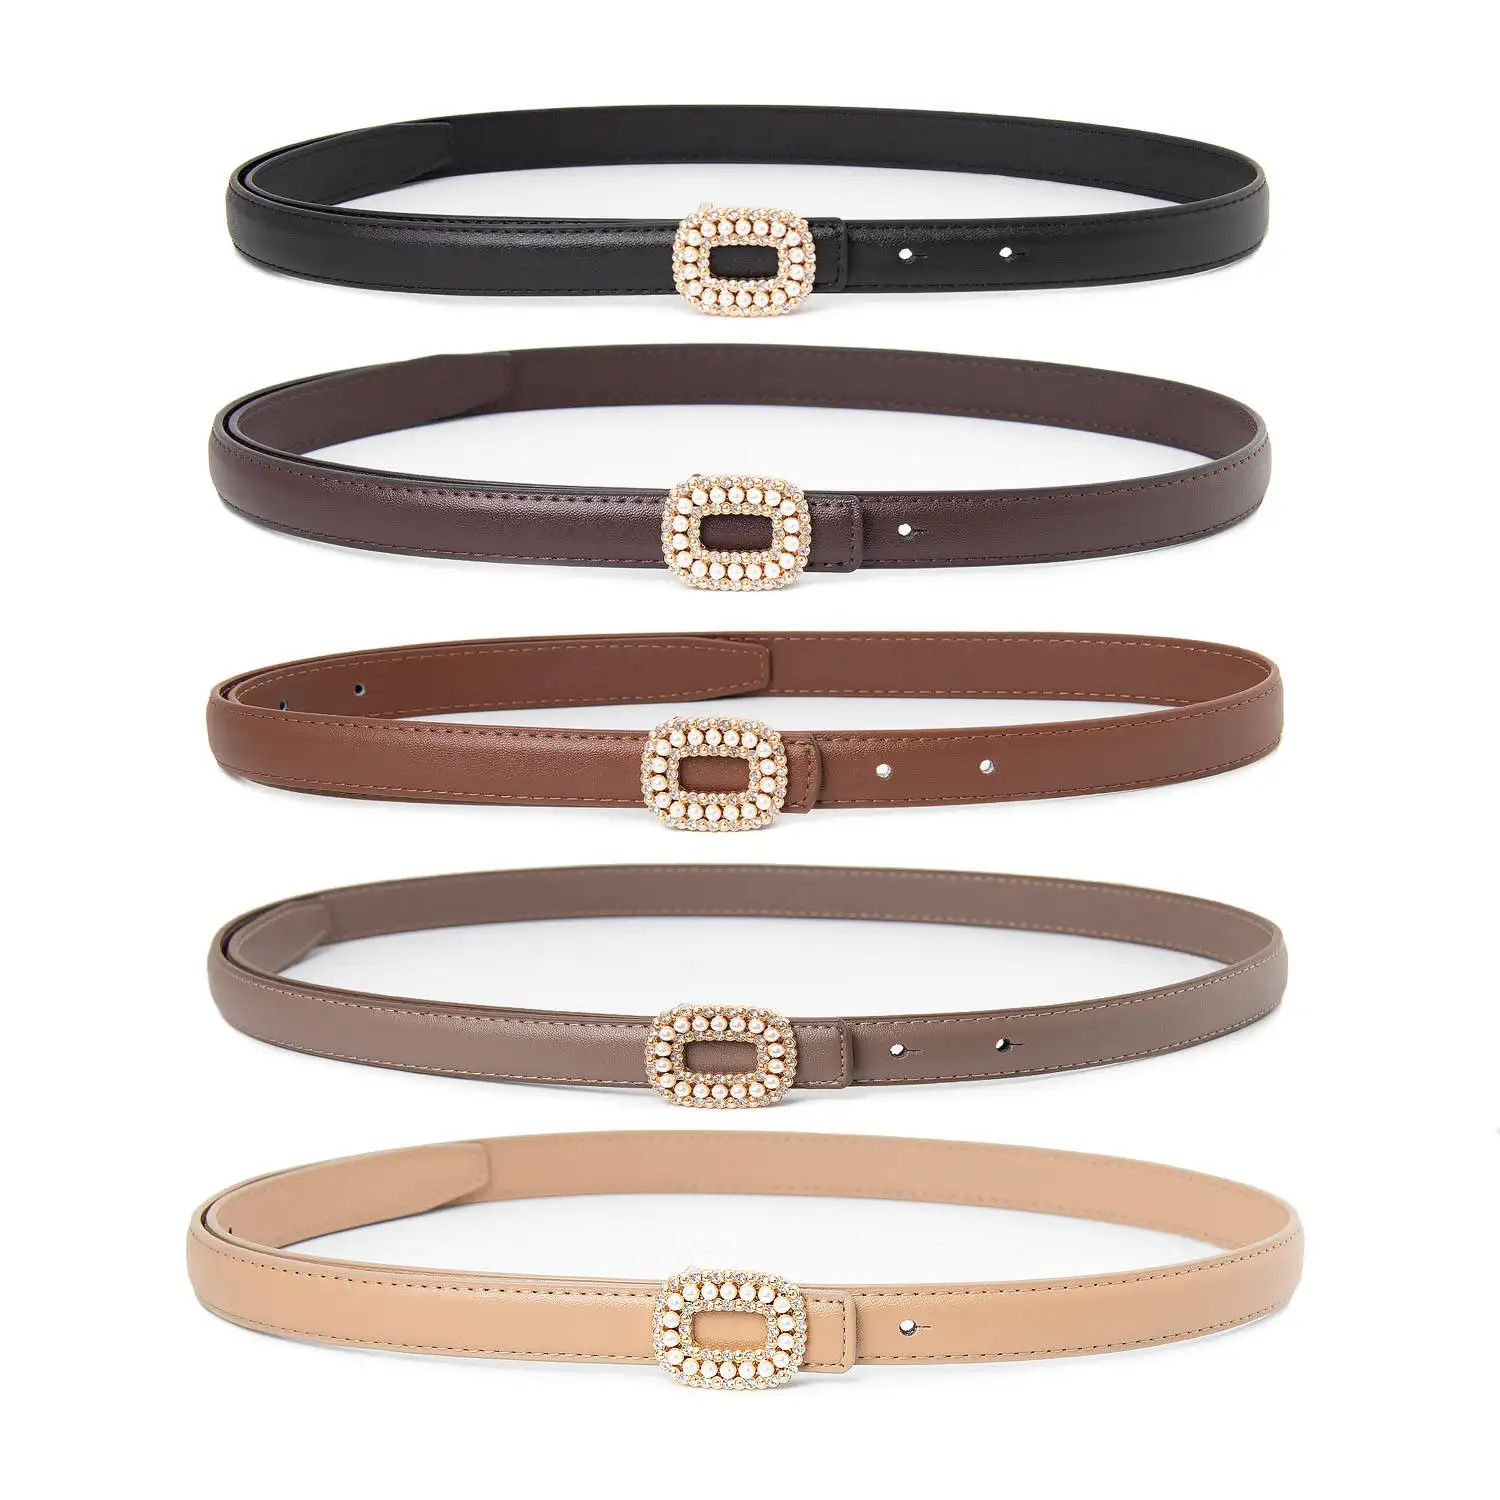 Pearl Decorative Buckle For Women's Belt 100% Genuine Leather Material Exquisite And Luxurious Can Be Paired With A Suit